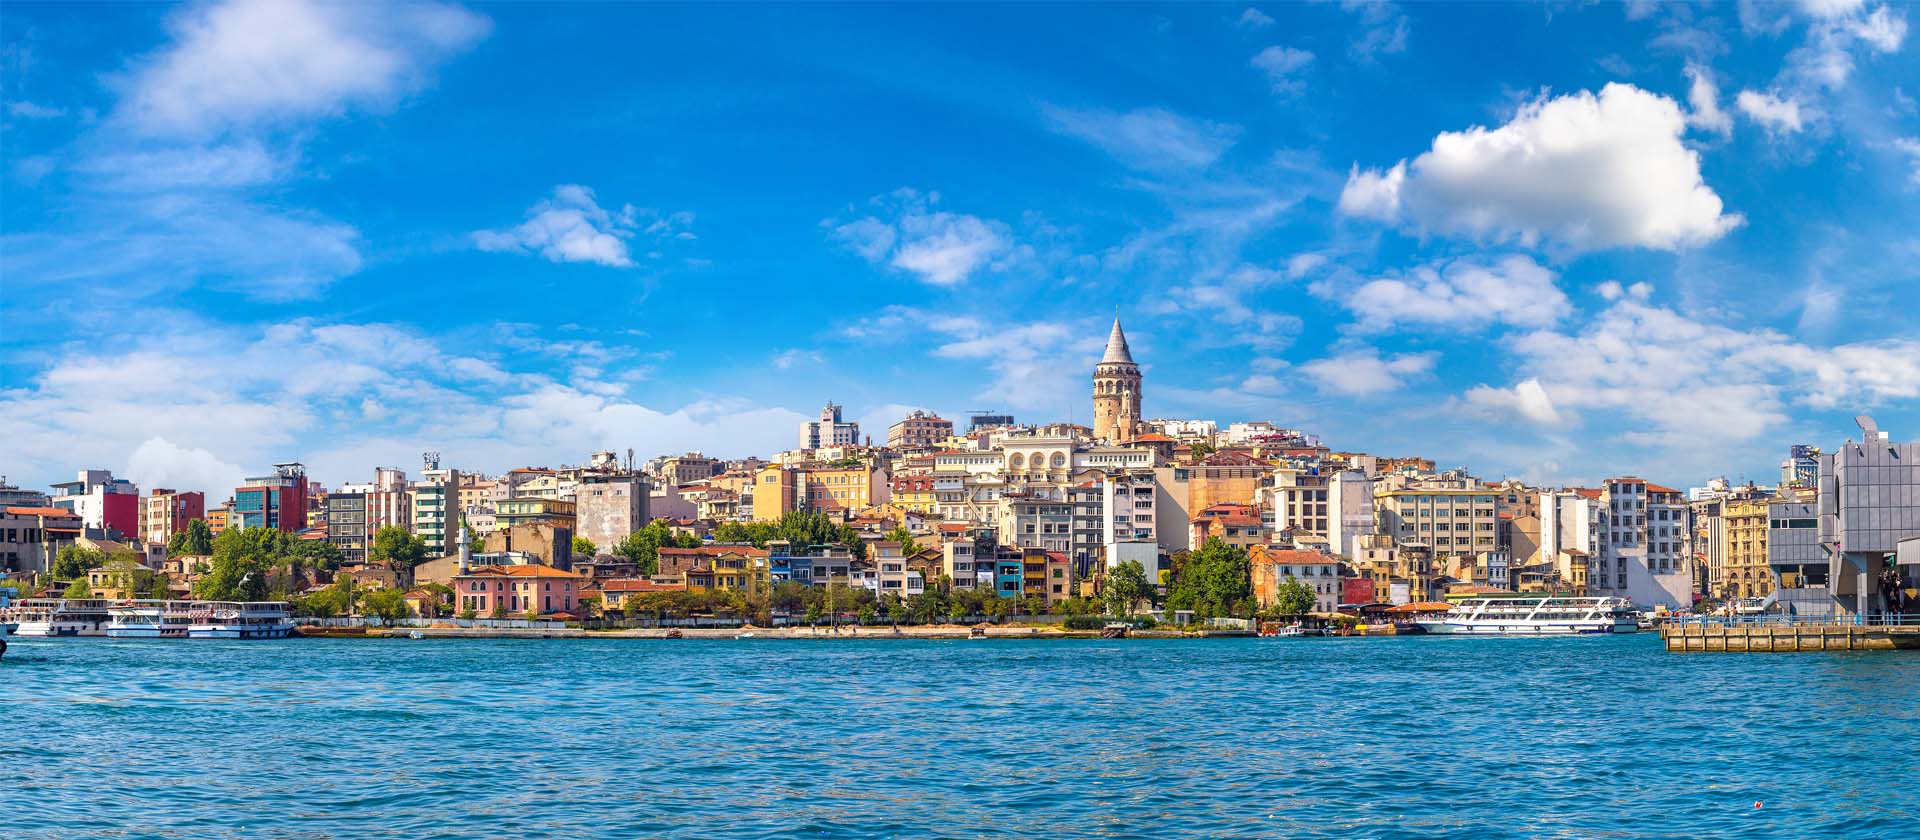 istanbul layover tours